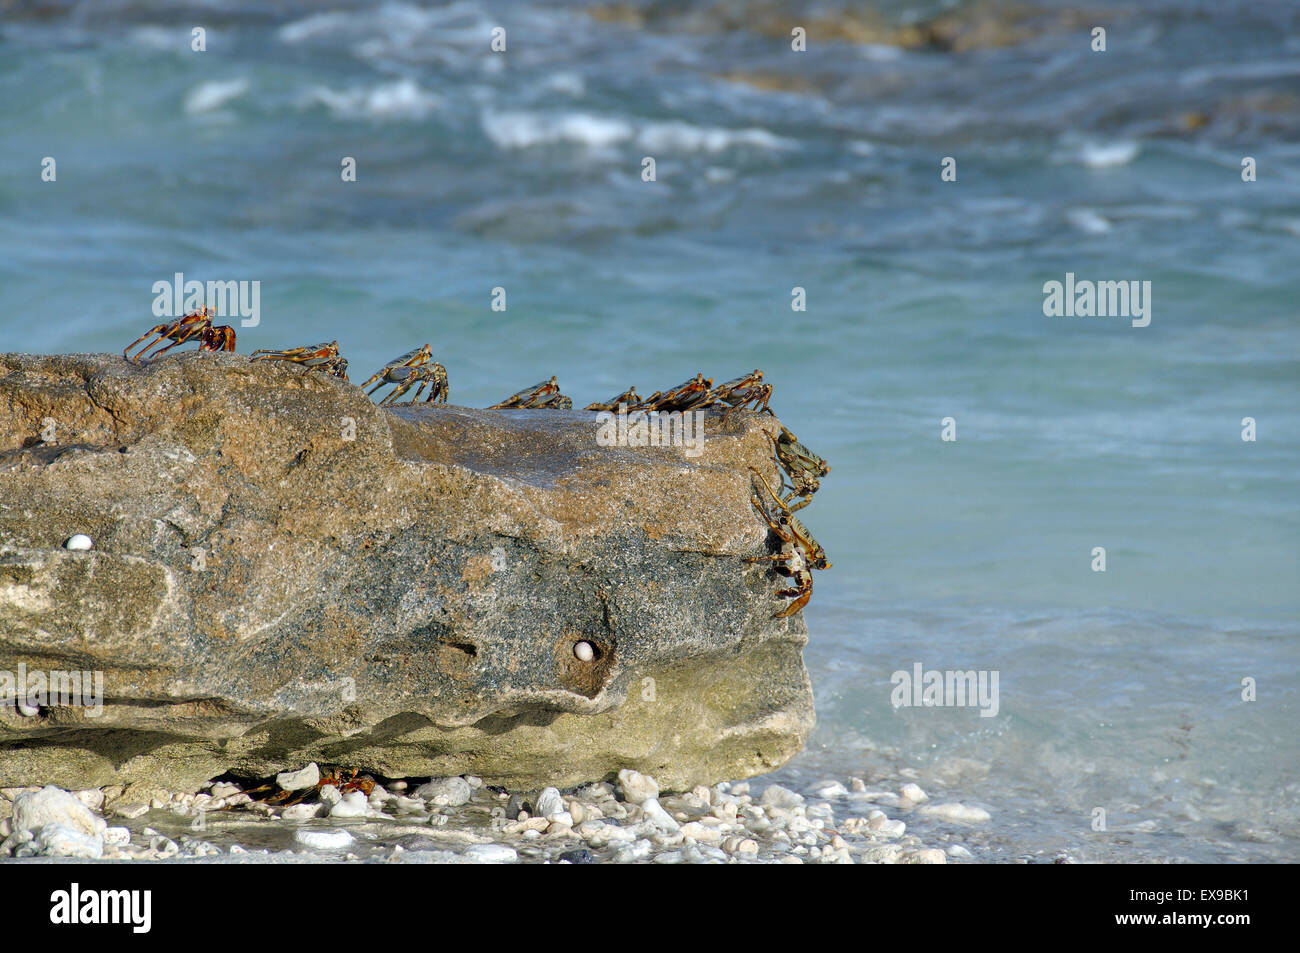 Green rock crab, Sally Lightfoot or abuete negro (Percnon gibbesi) Crabs gathered at the edge of a cliff near the water Stock Photo